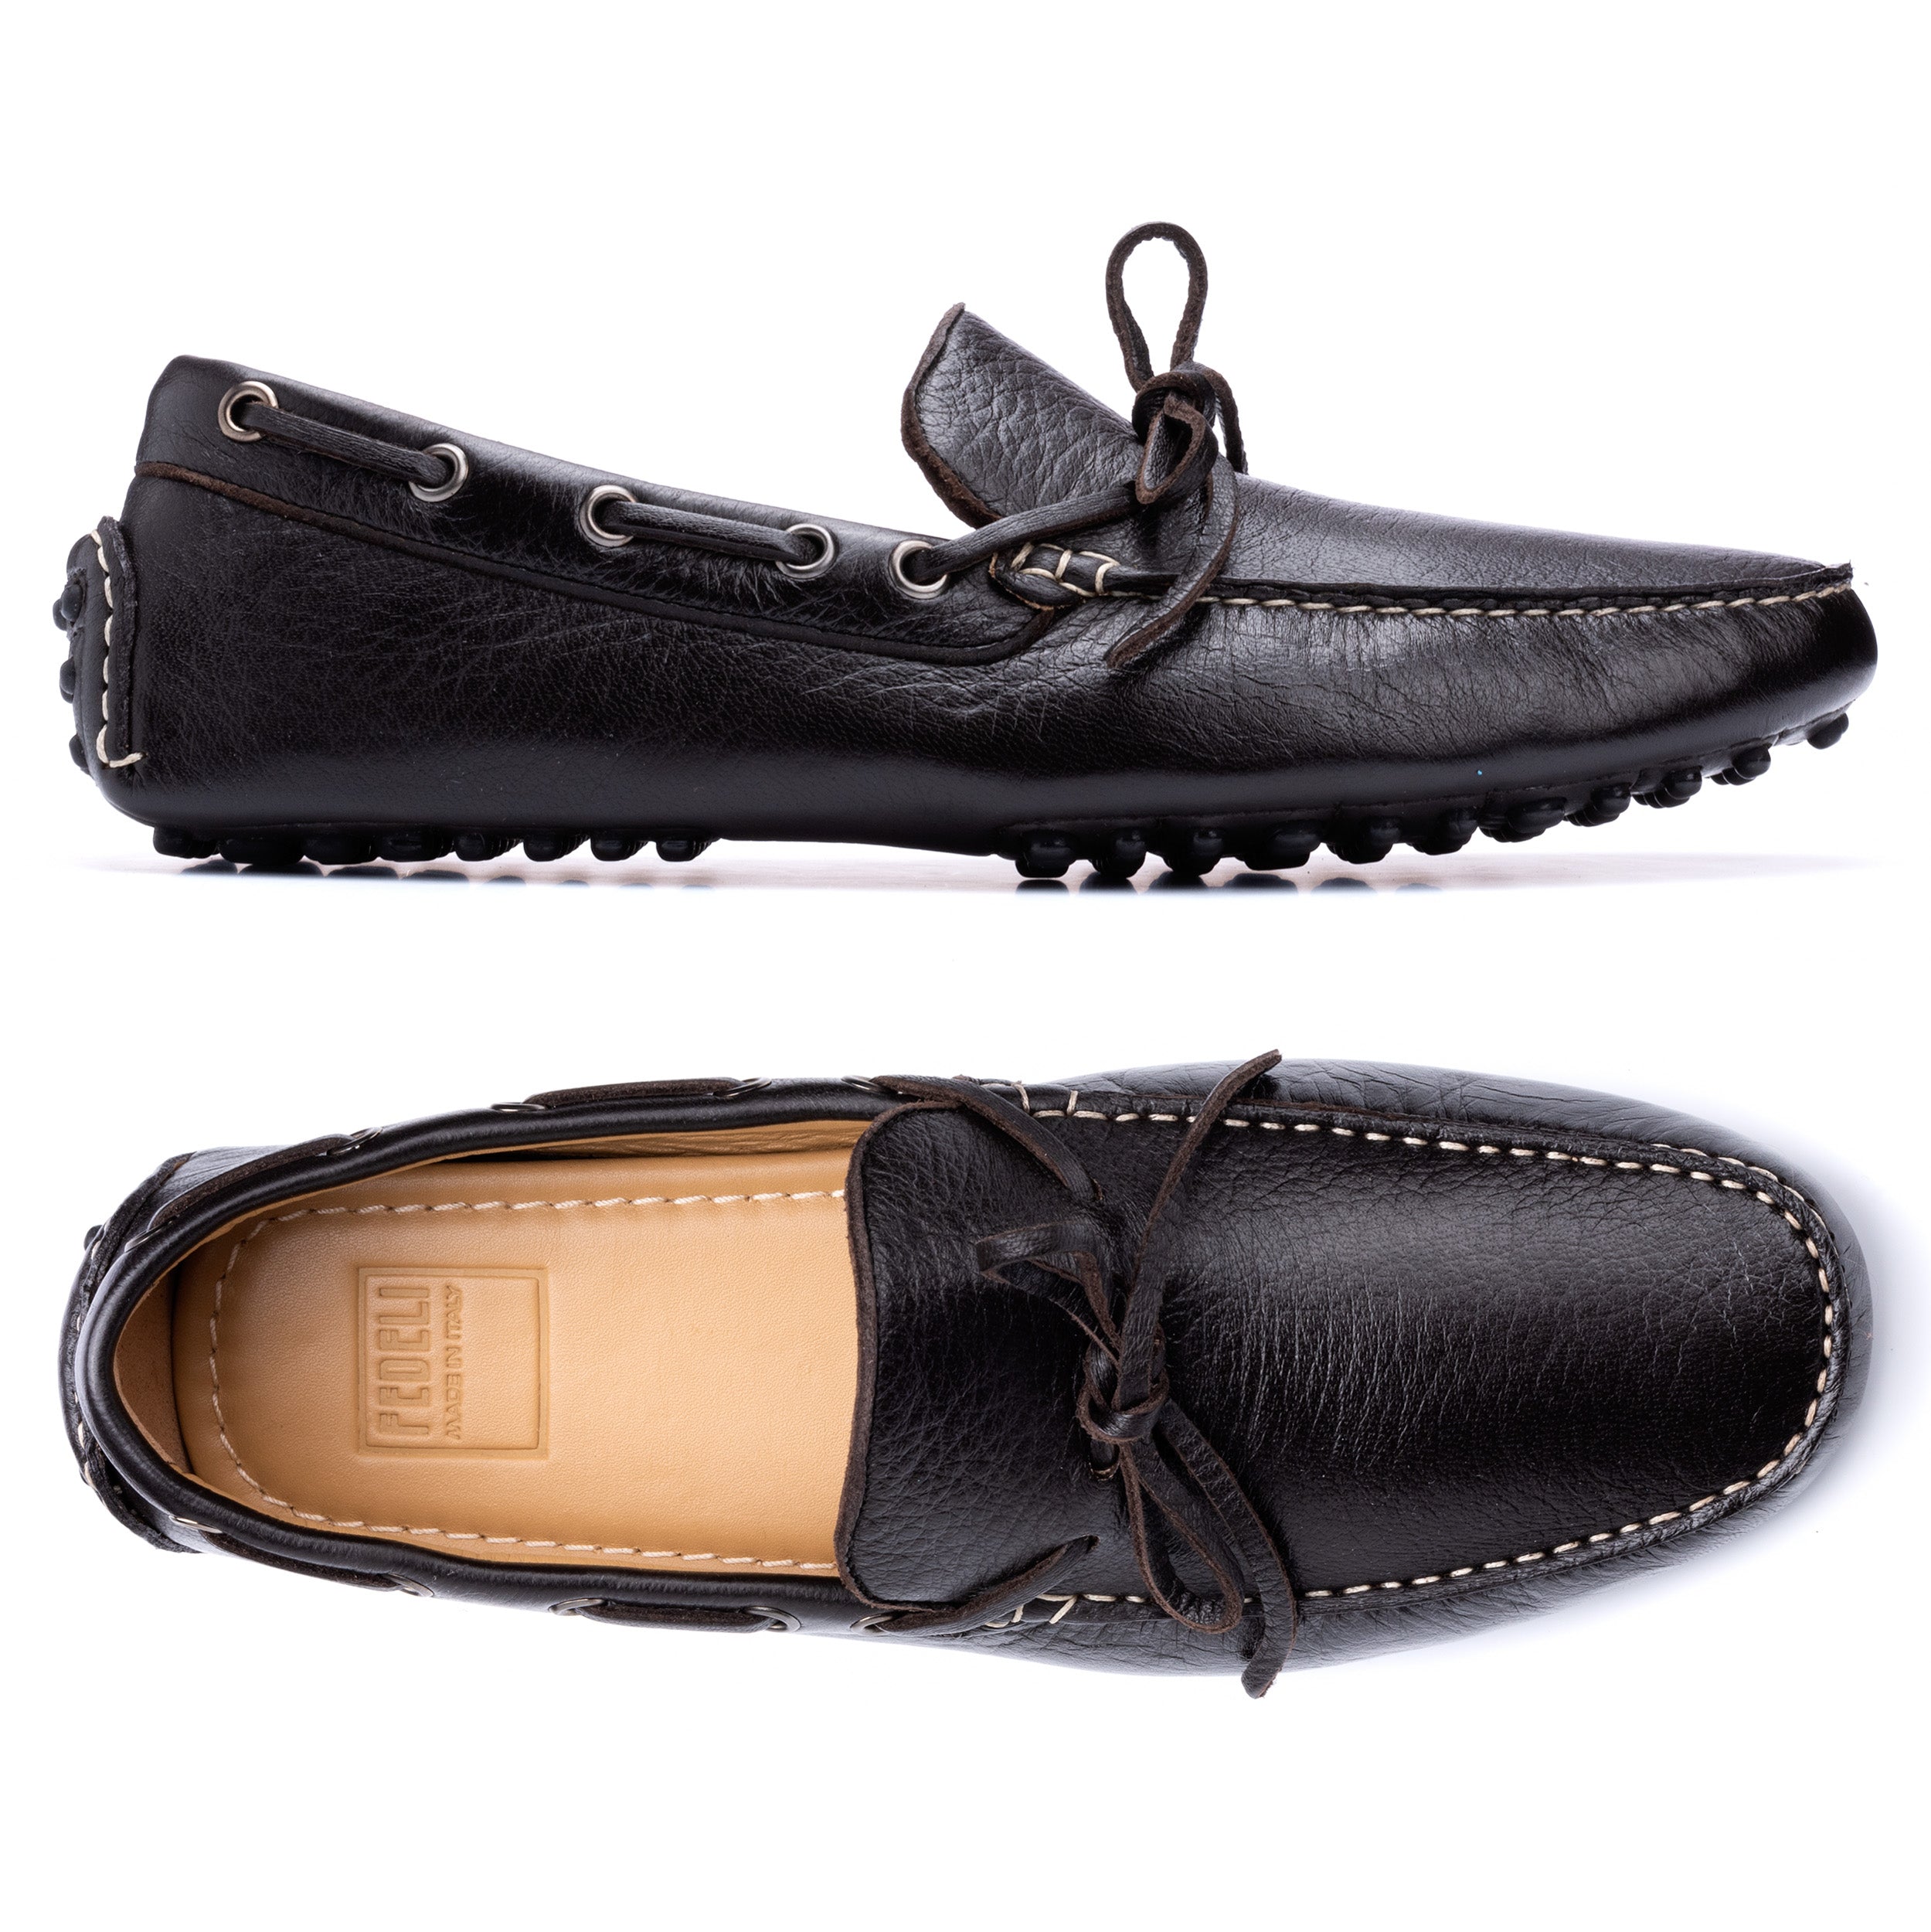 Estate Loafer - Luxury Loafers and Moccasins - Shoes